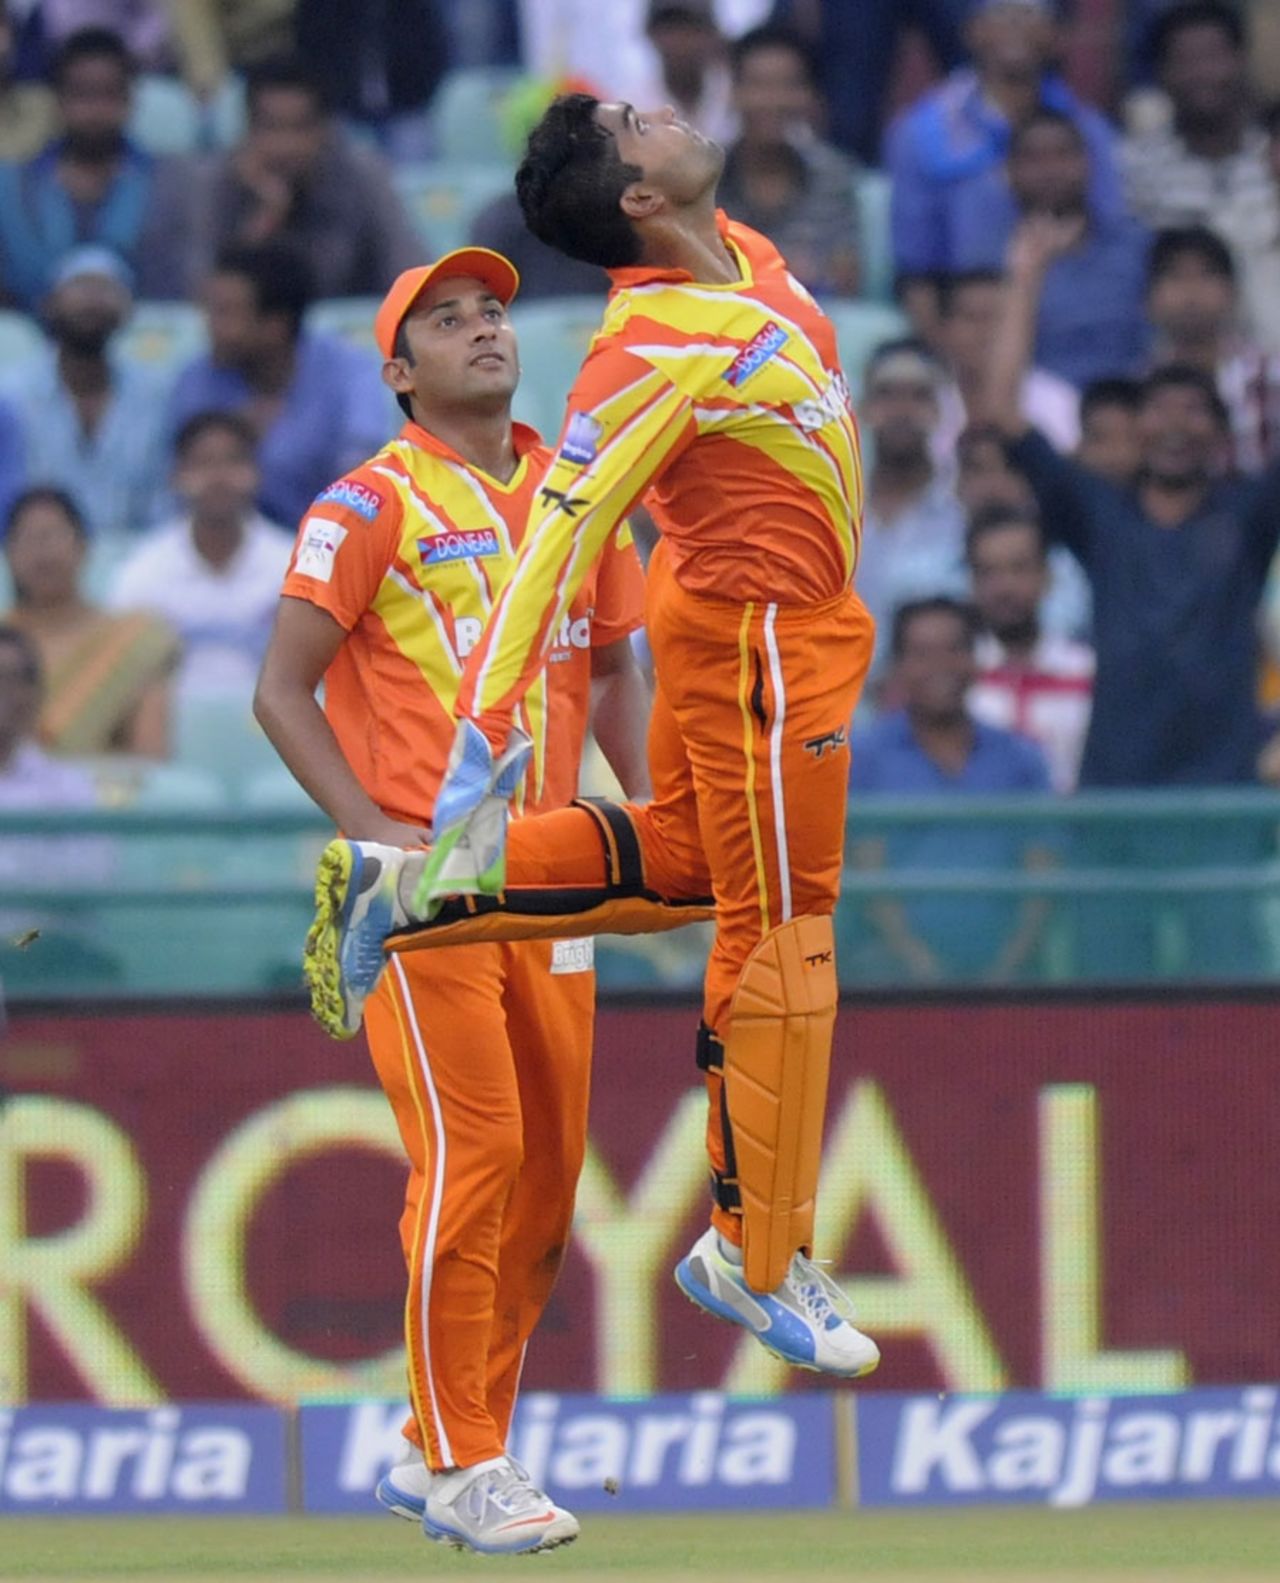 Umar Akmal exults after taking the catch to dismiss Kane Williamson, Northern Knights v Lahore Lions, CLT20, Raipur, September 14, 2014